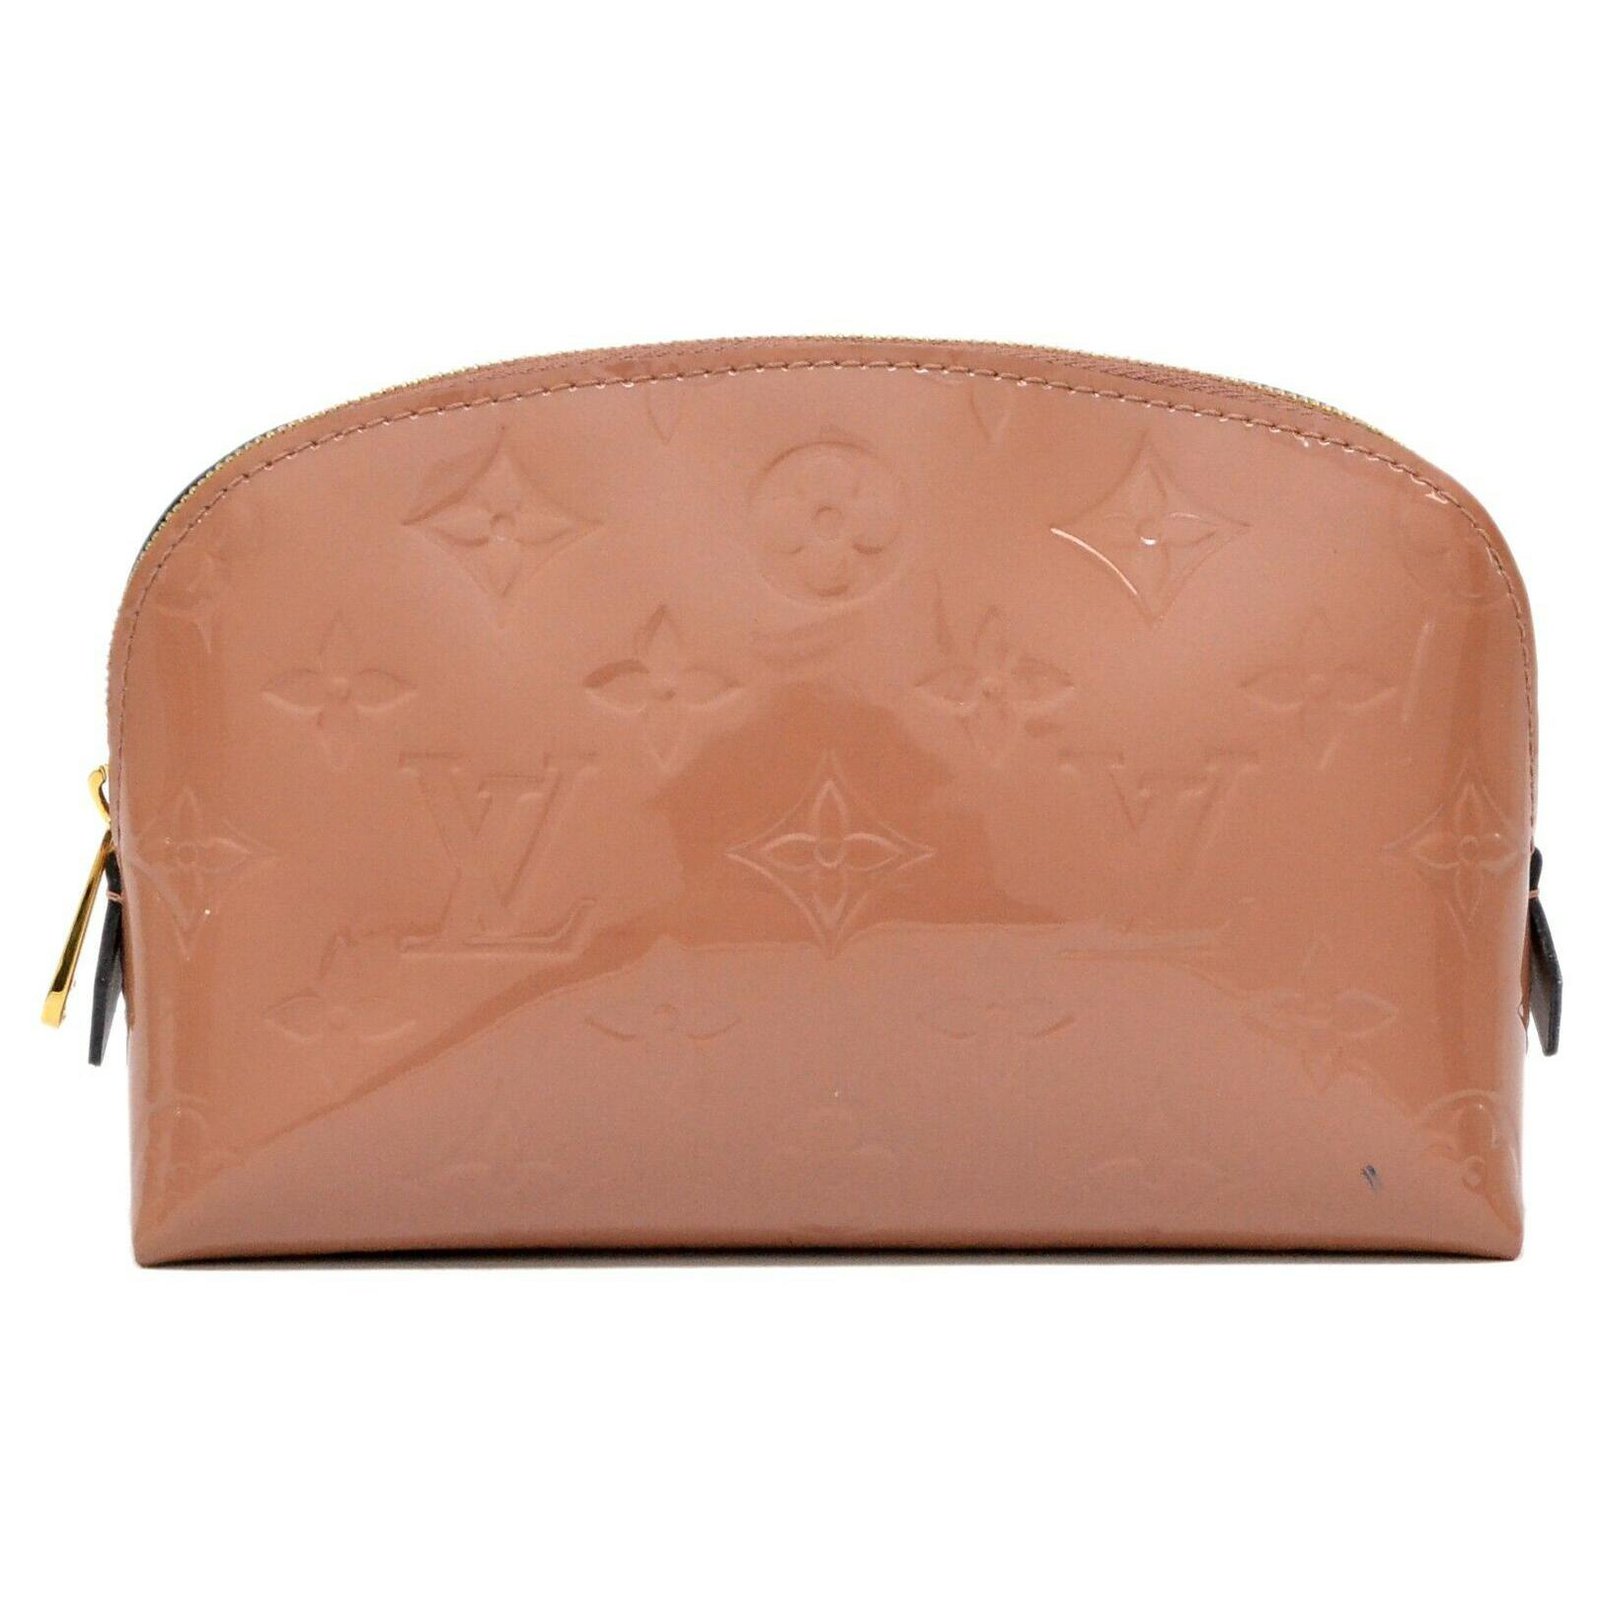 Patent leather vanity case Louis Vuitton Pink in Patent leather - 34308592